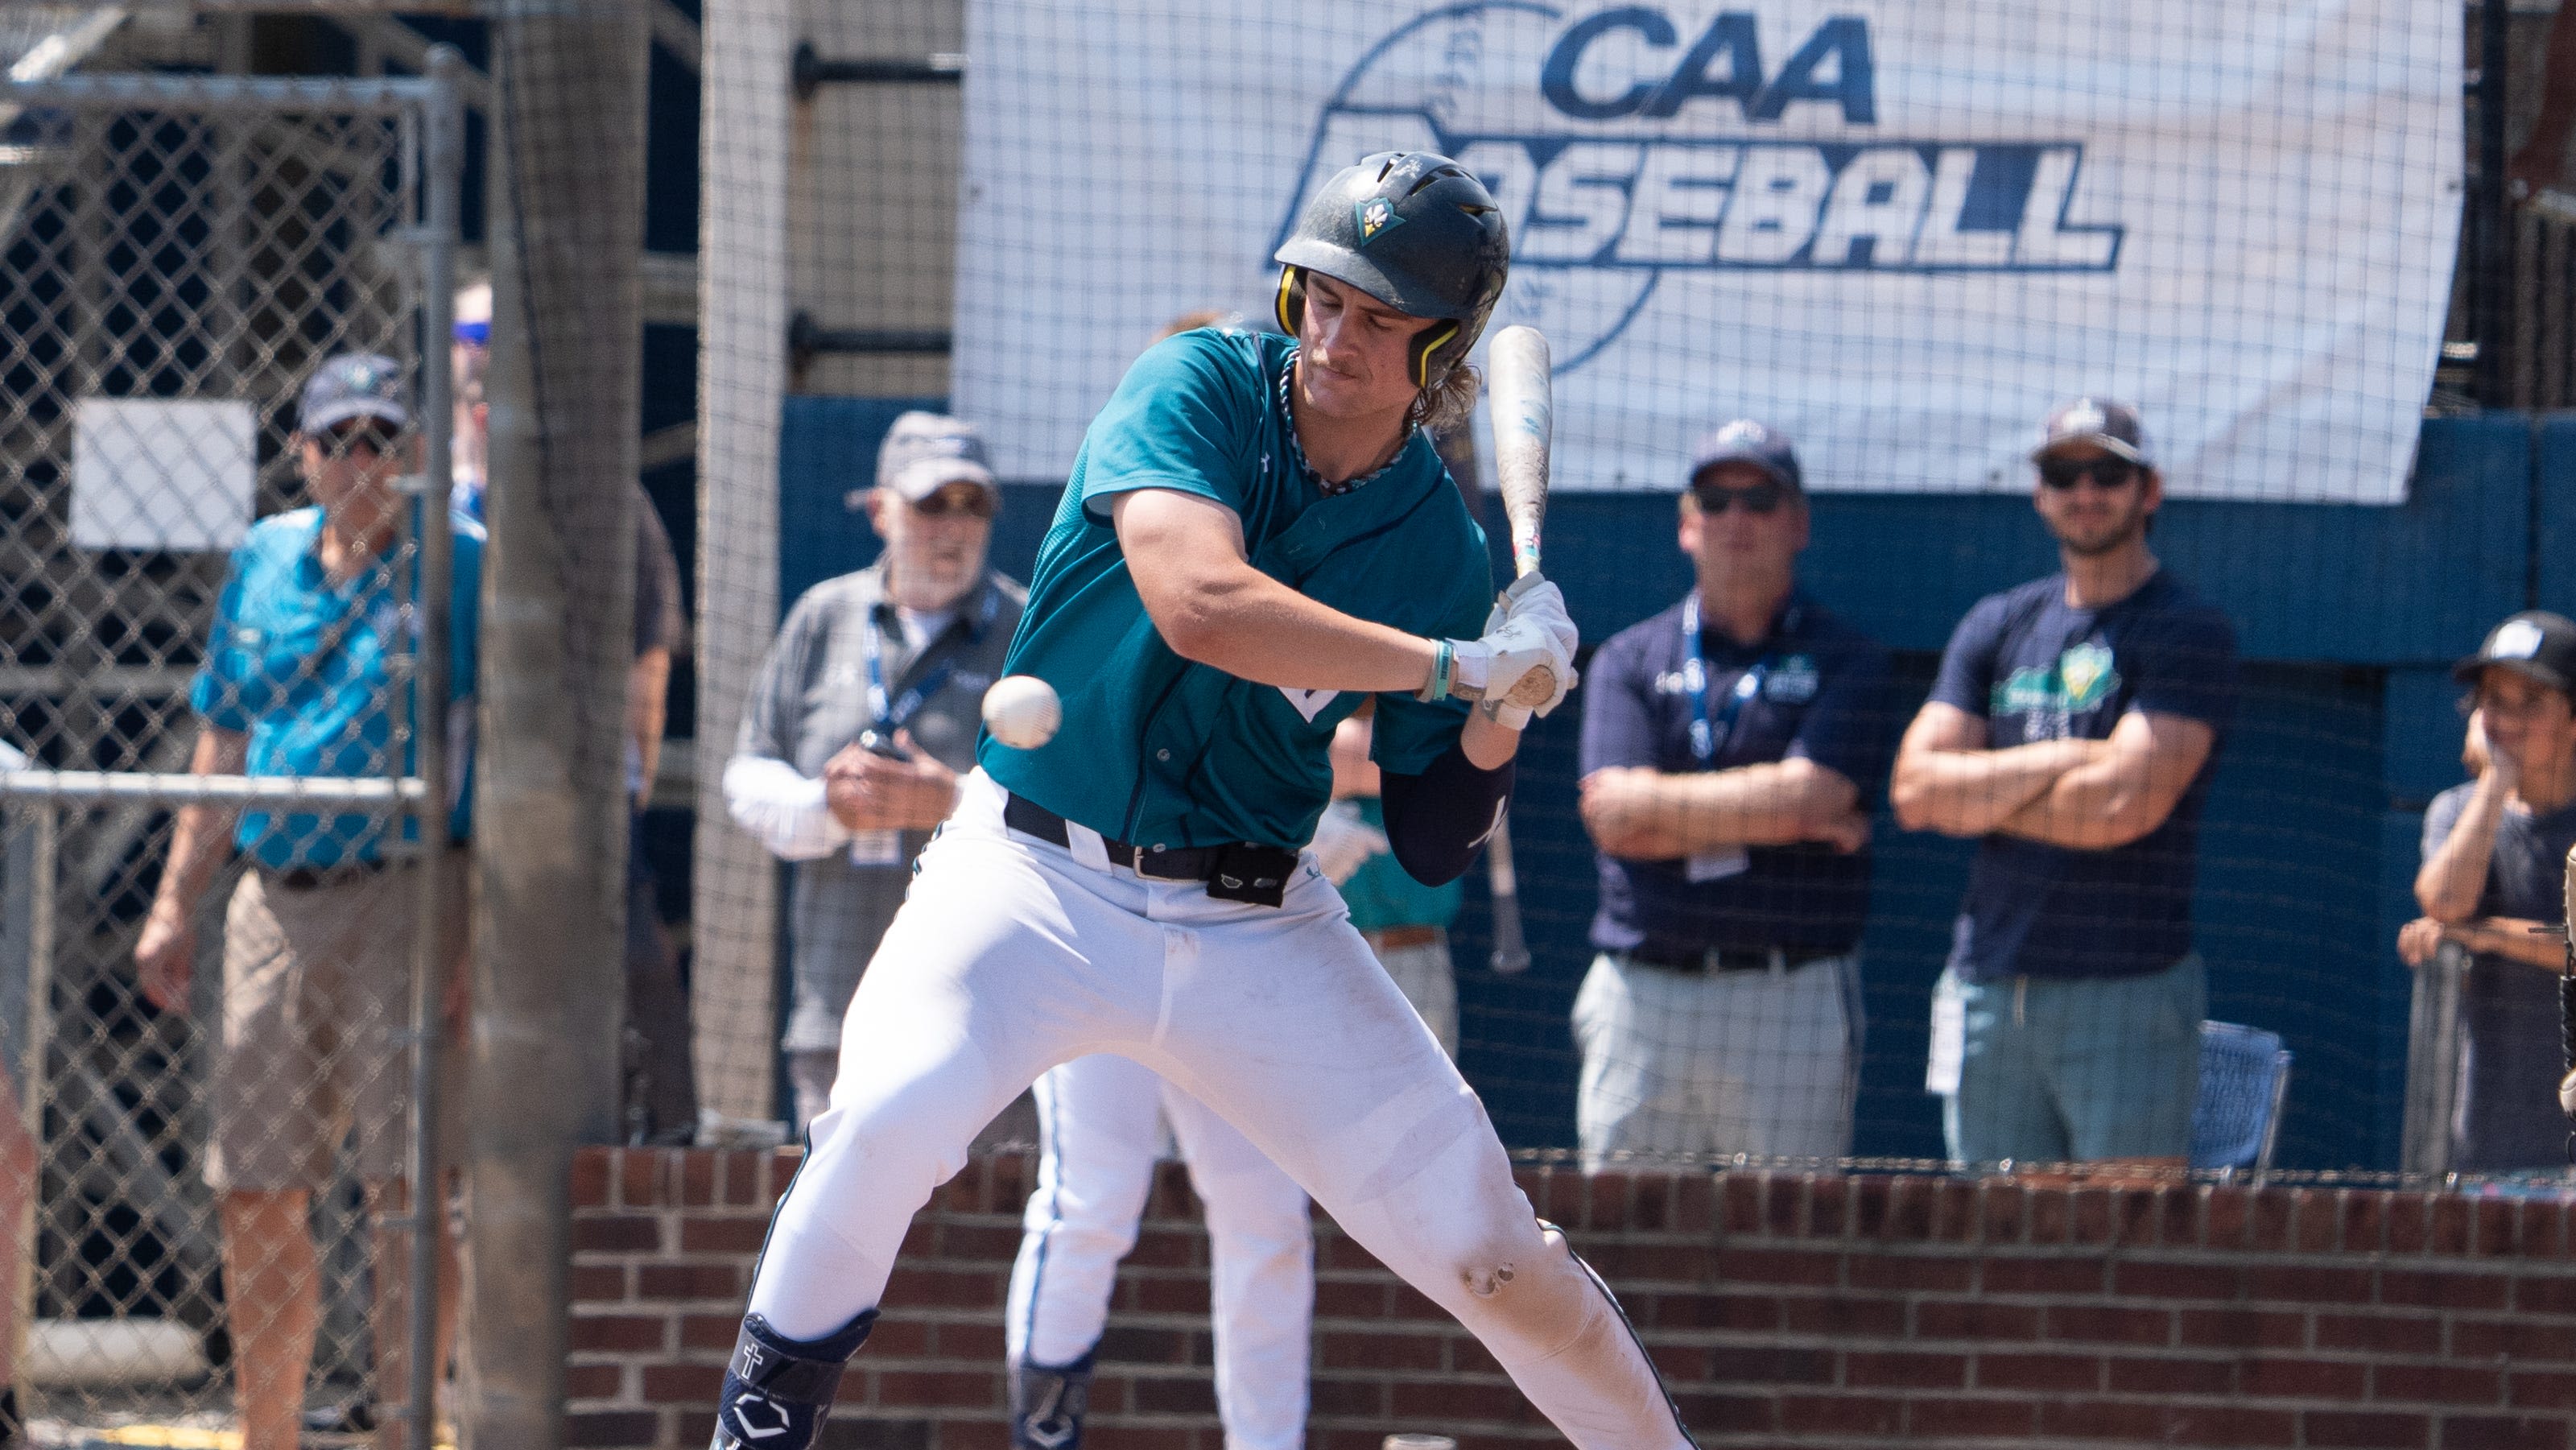 UNCW baseball a No. 2 seed in NCAA Tournament, will play in Athens Regional